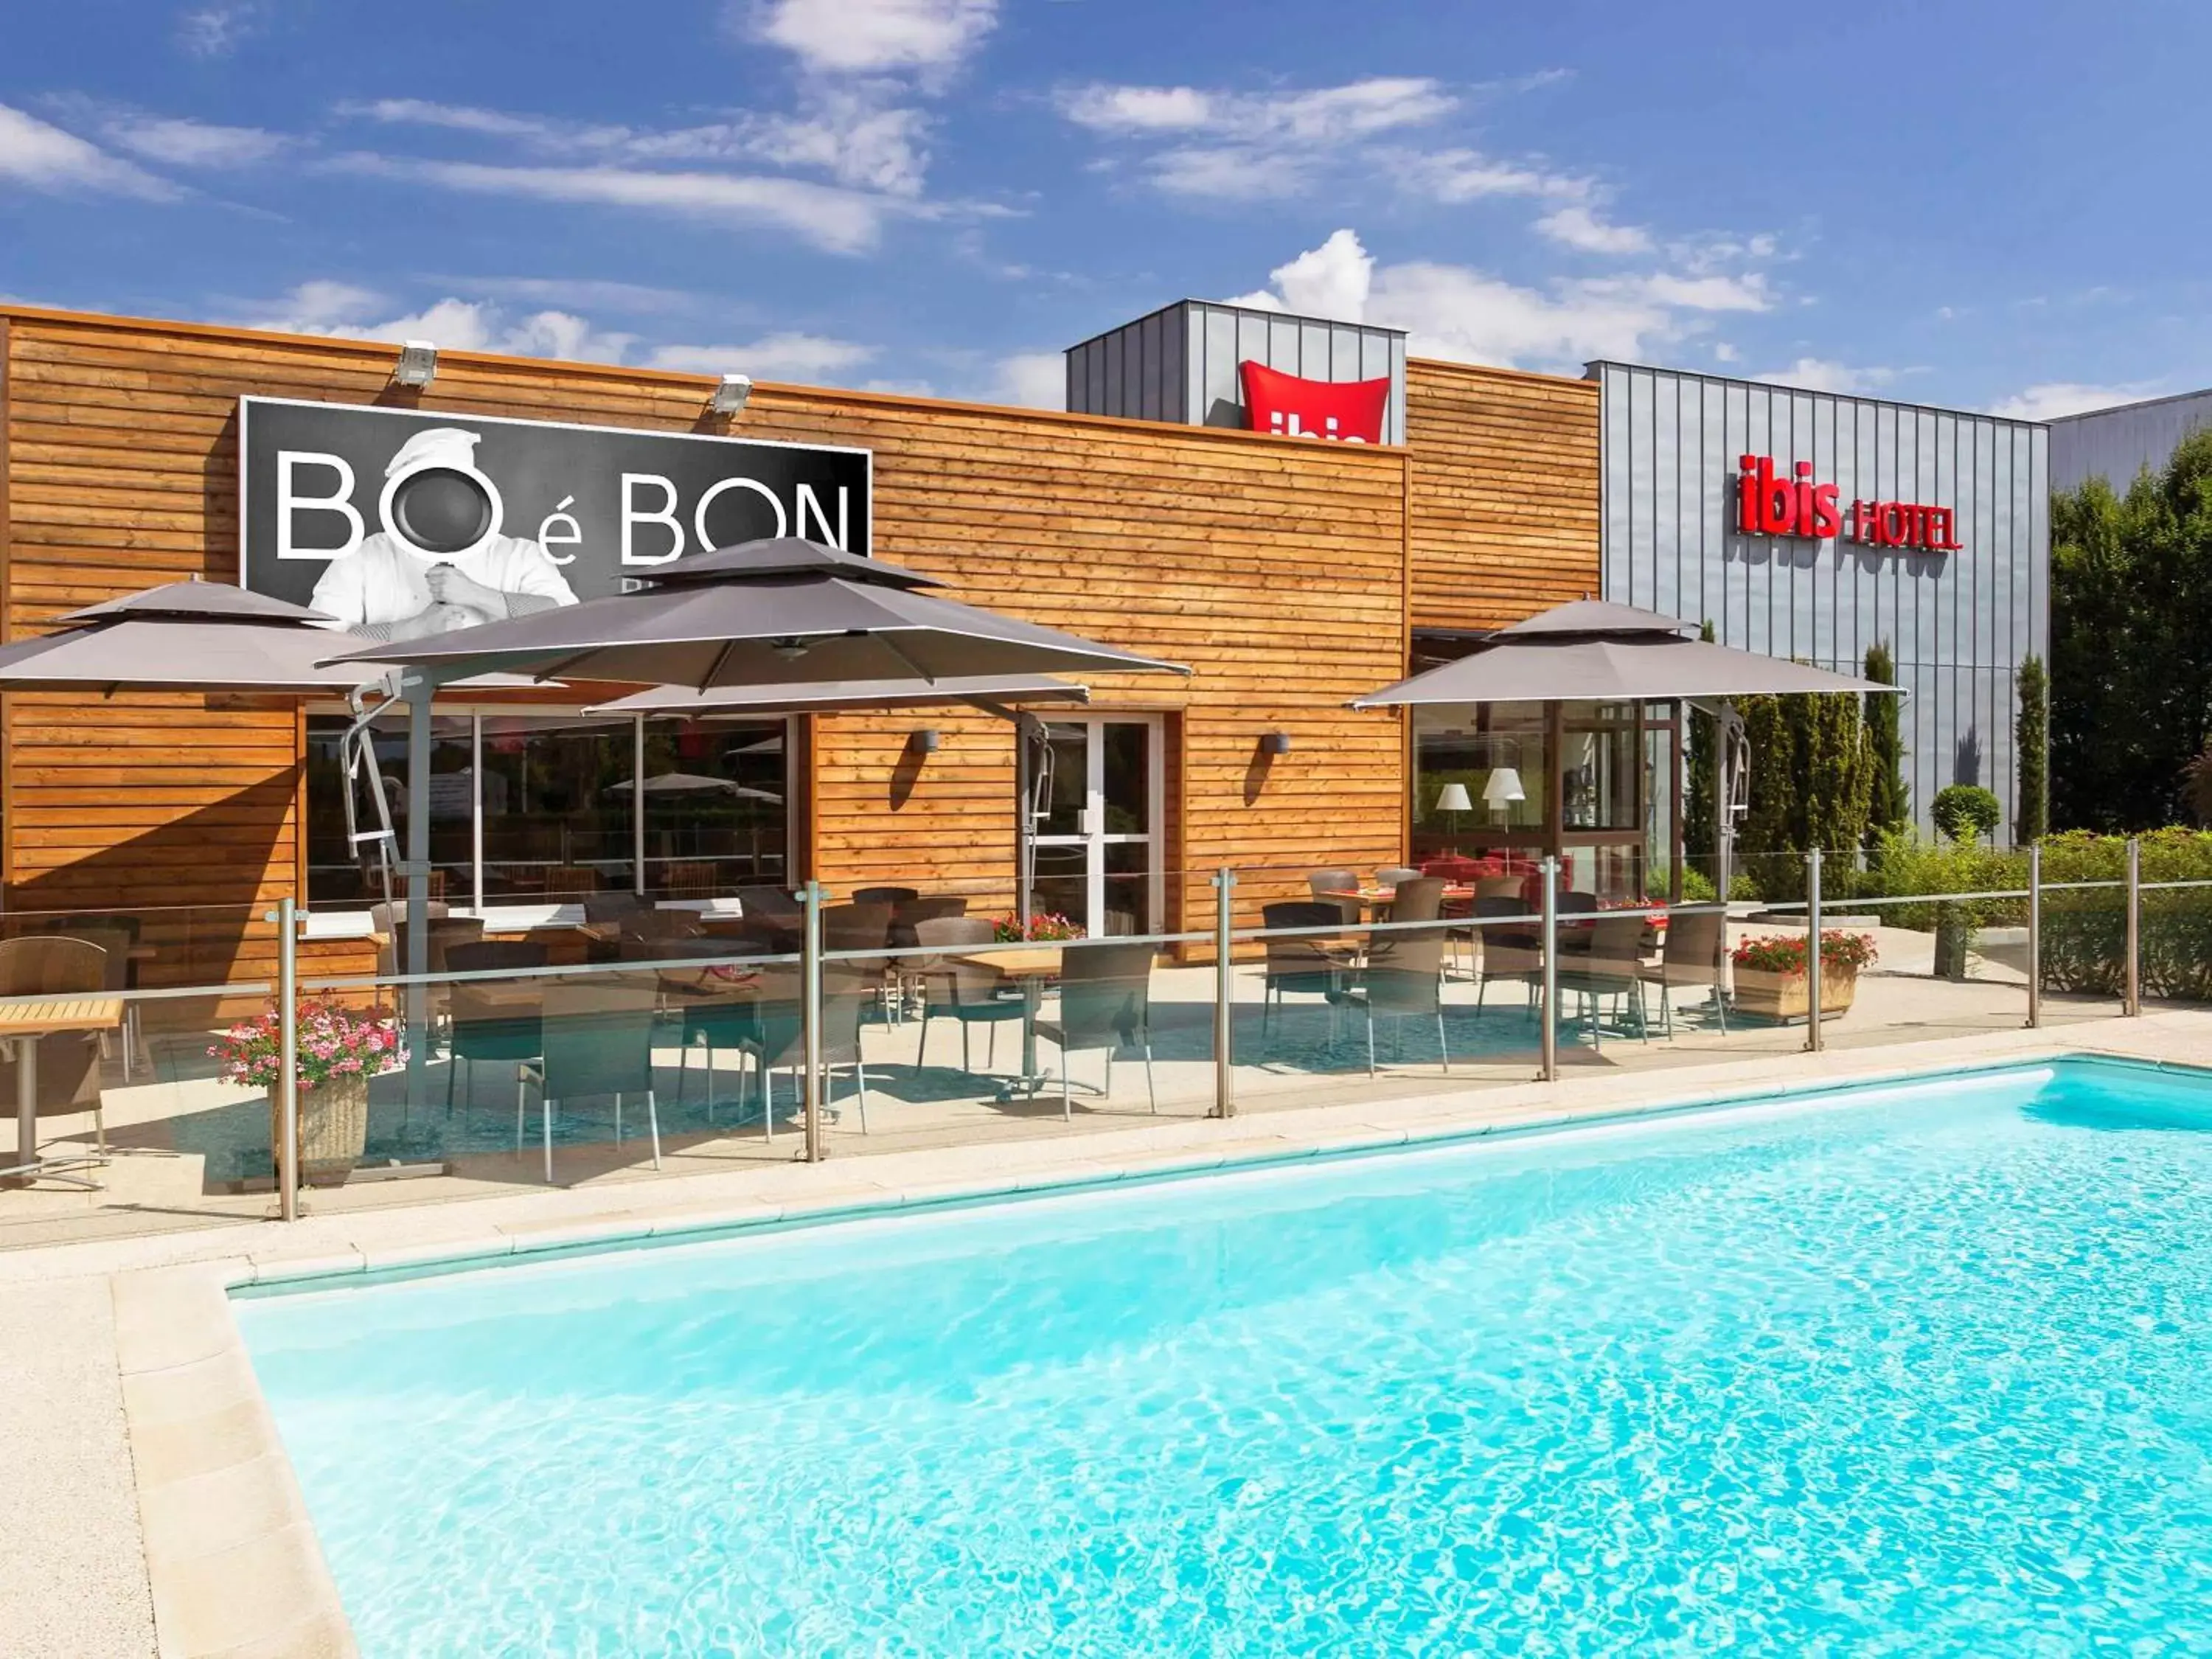 Property building, Swimming Pool in Ibis Roanne Le Coteau Hotel Restaurant